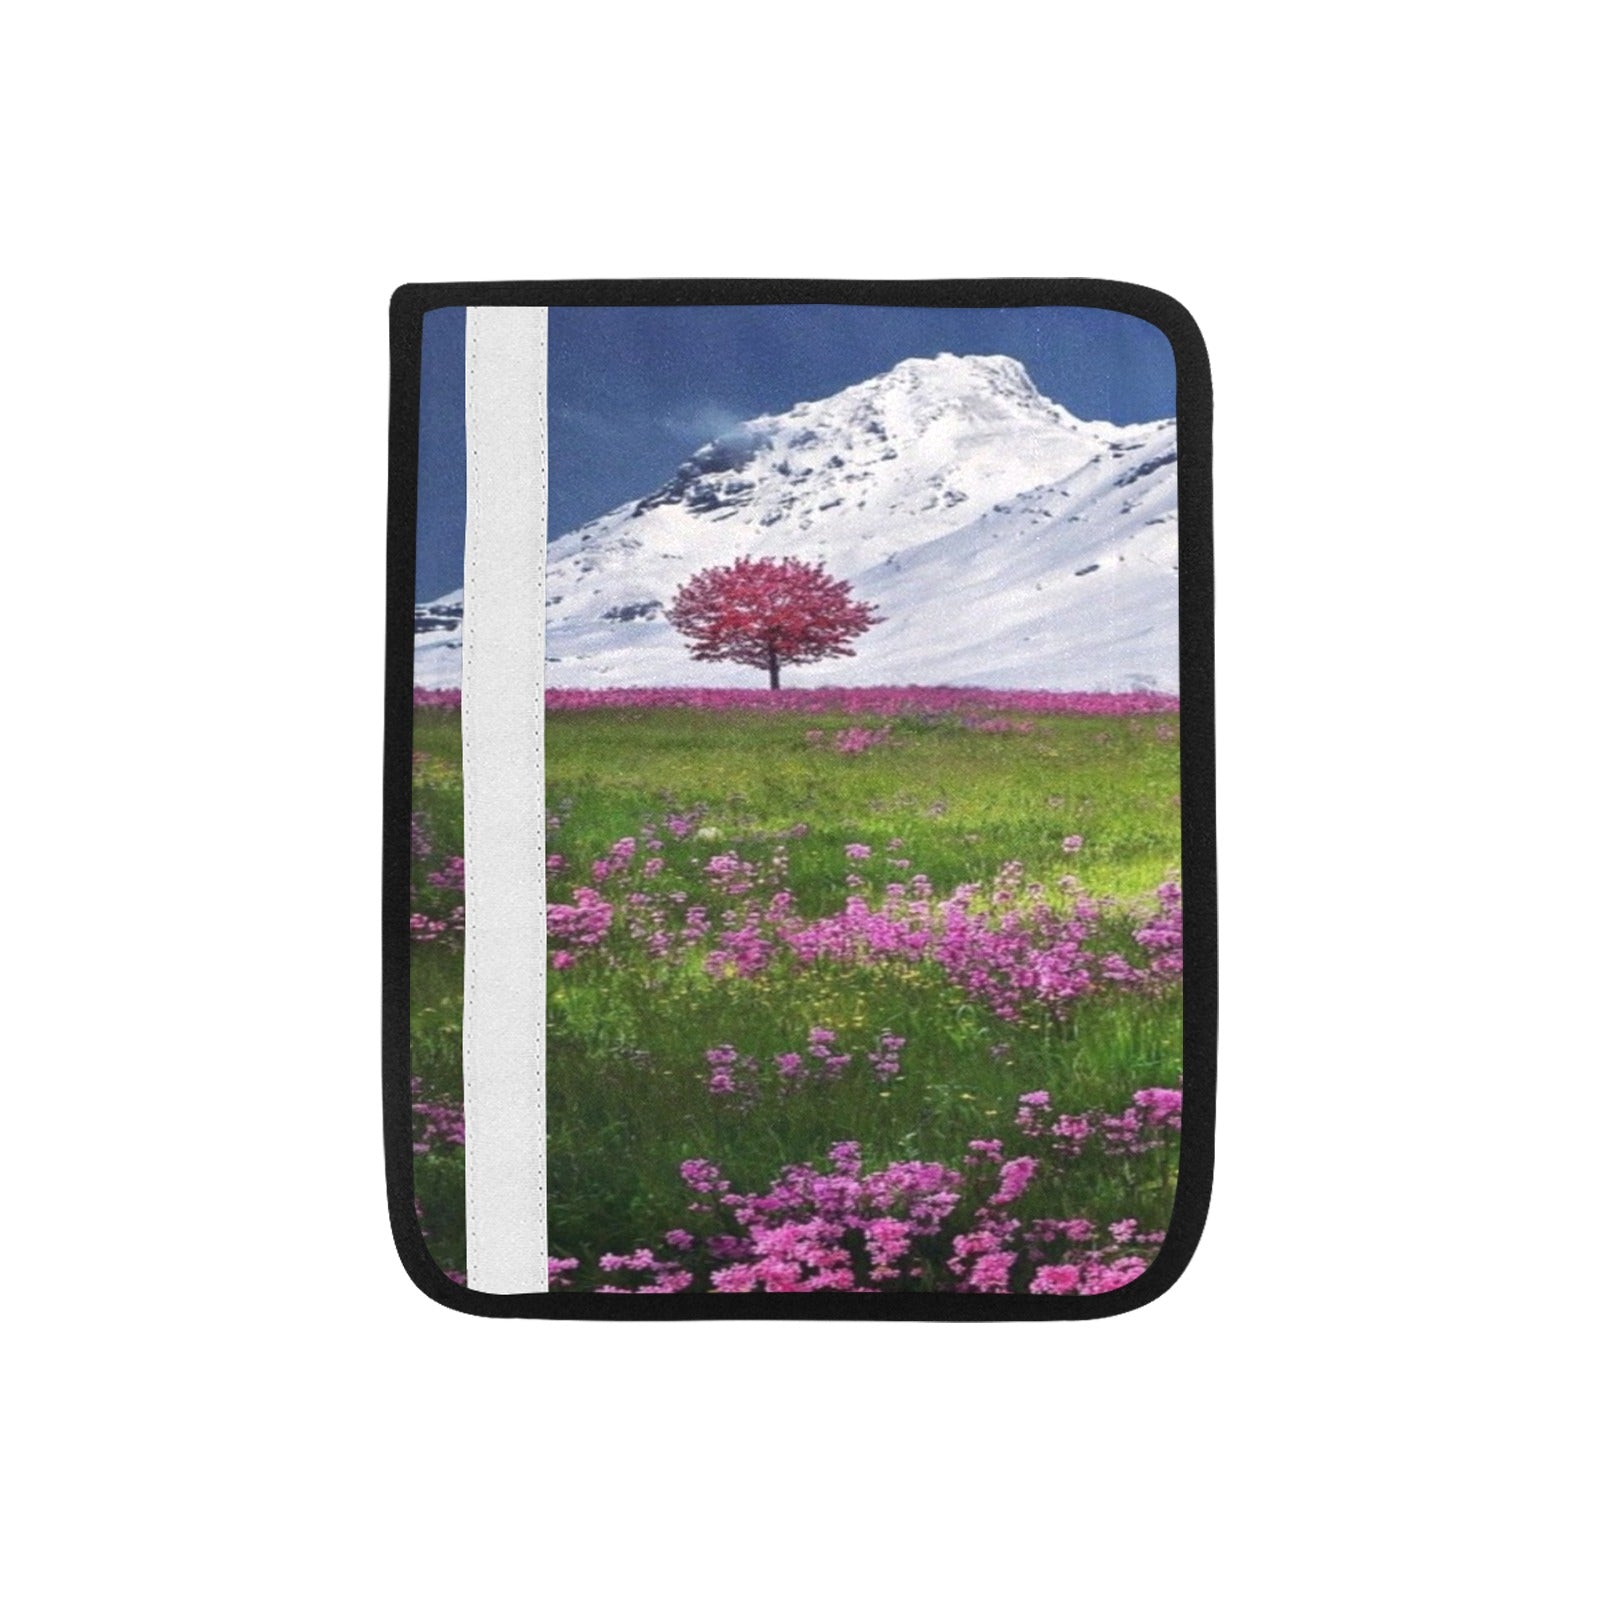 Mountains and Flowers Car Seat Belt Cover 7" x 12.6"